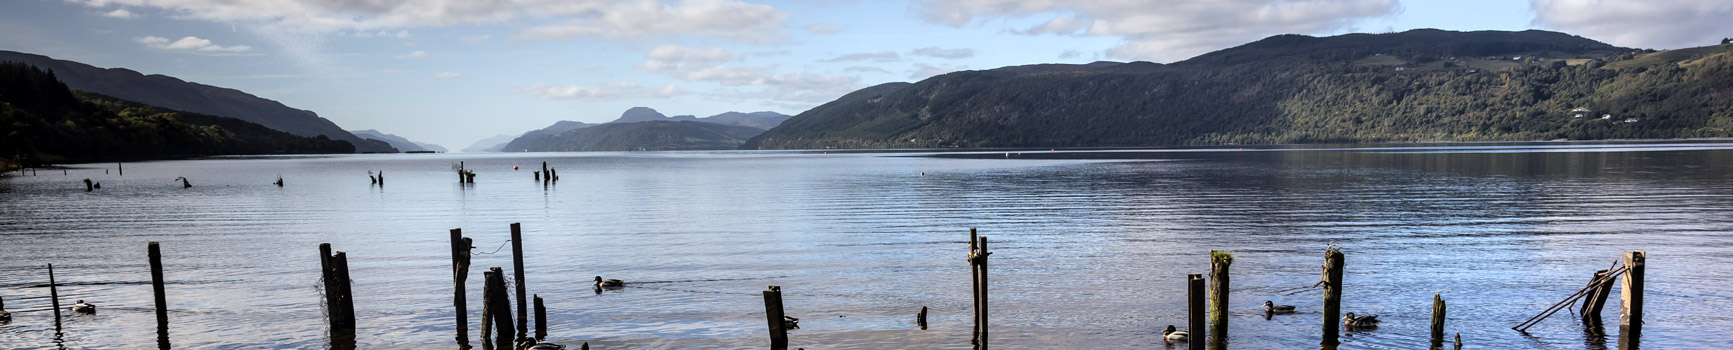 View of Loch Ness from Dores Beach